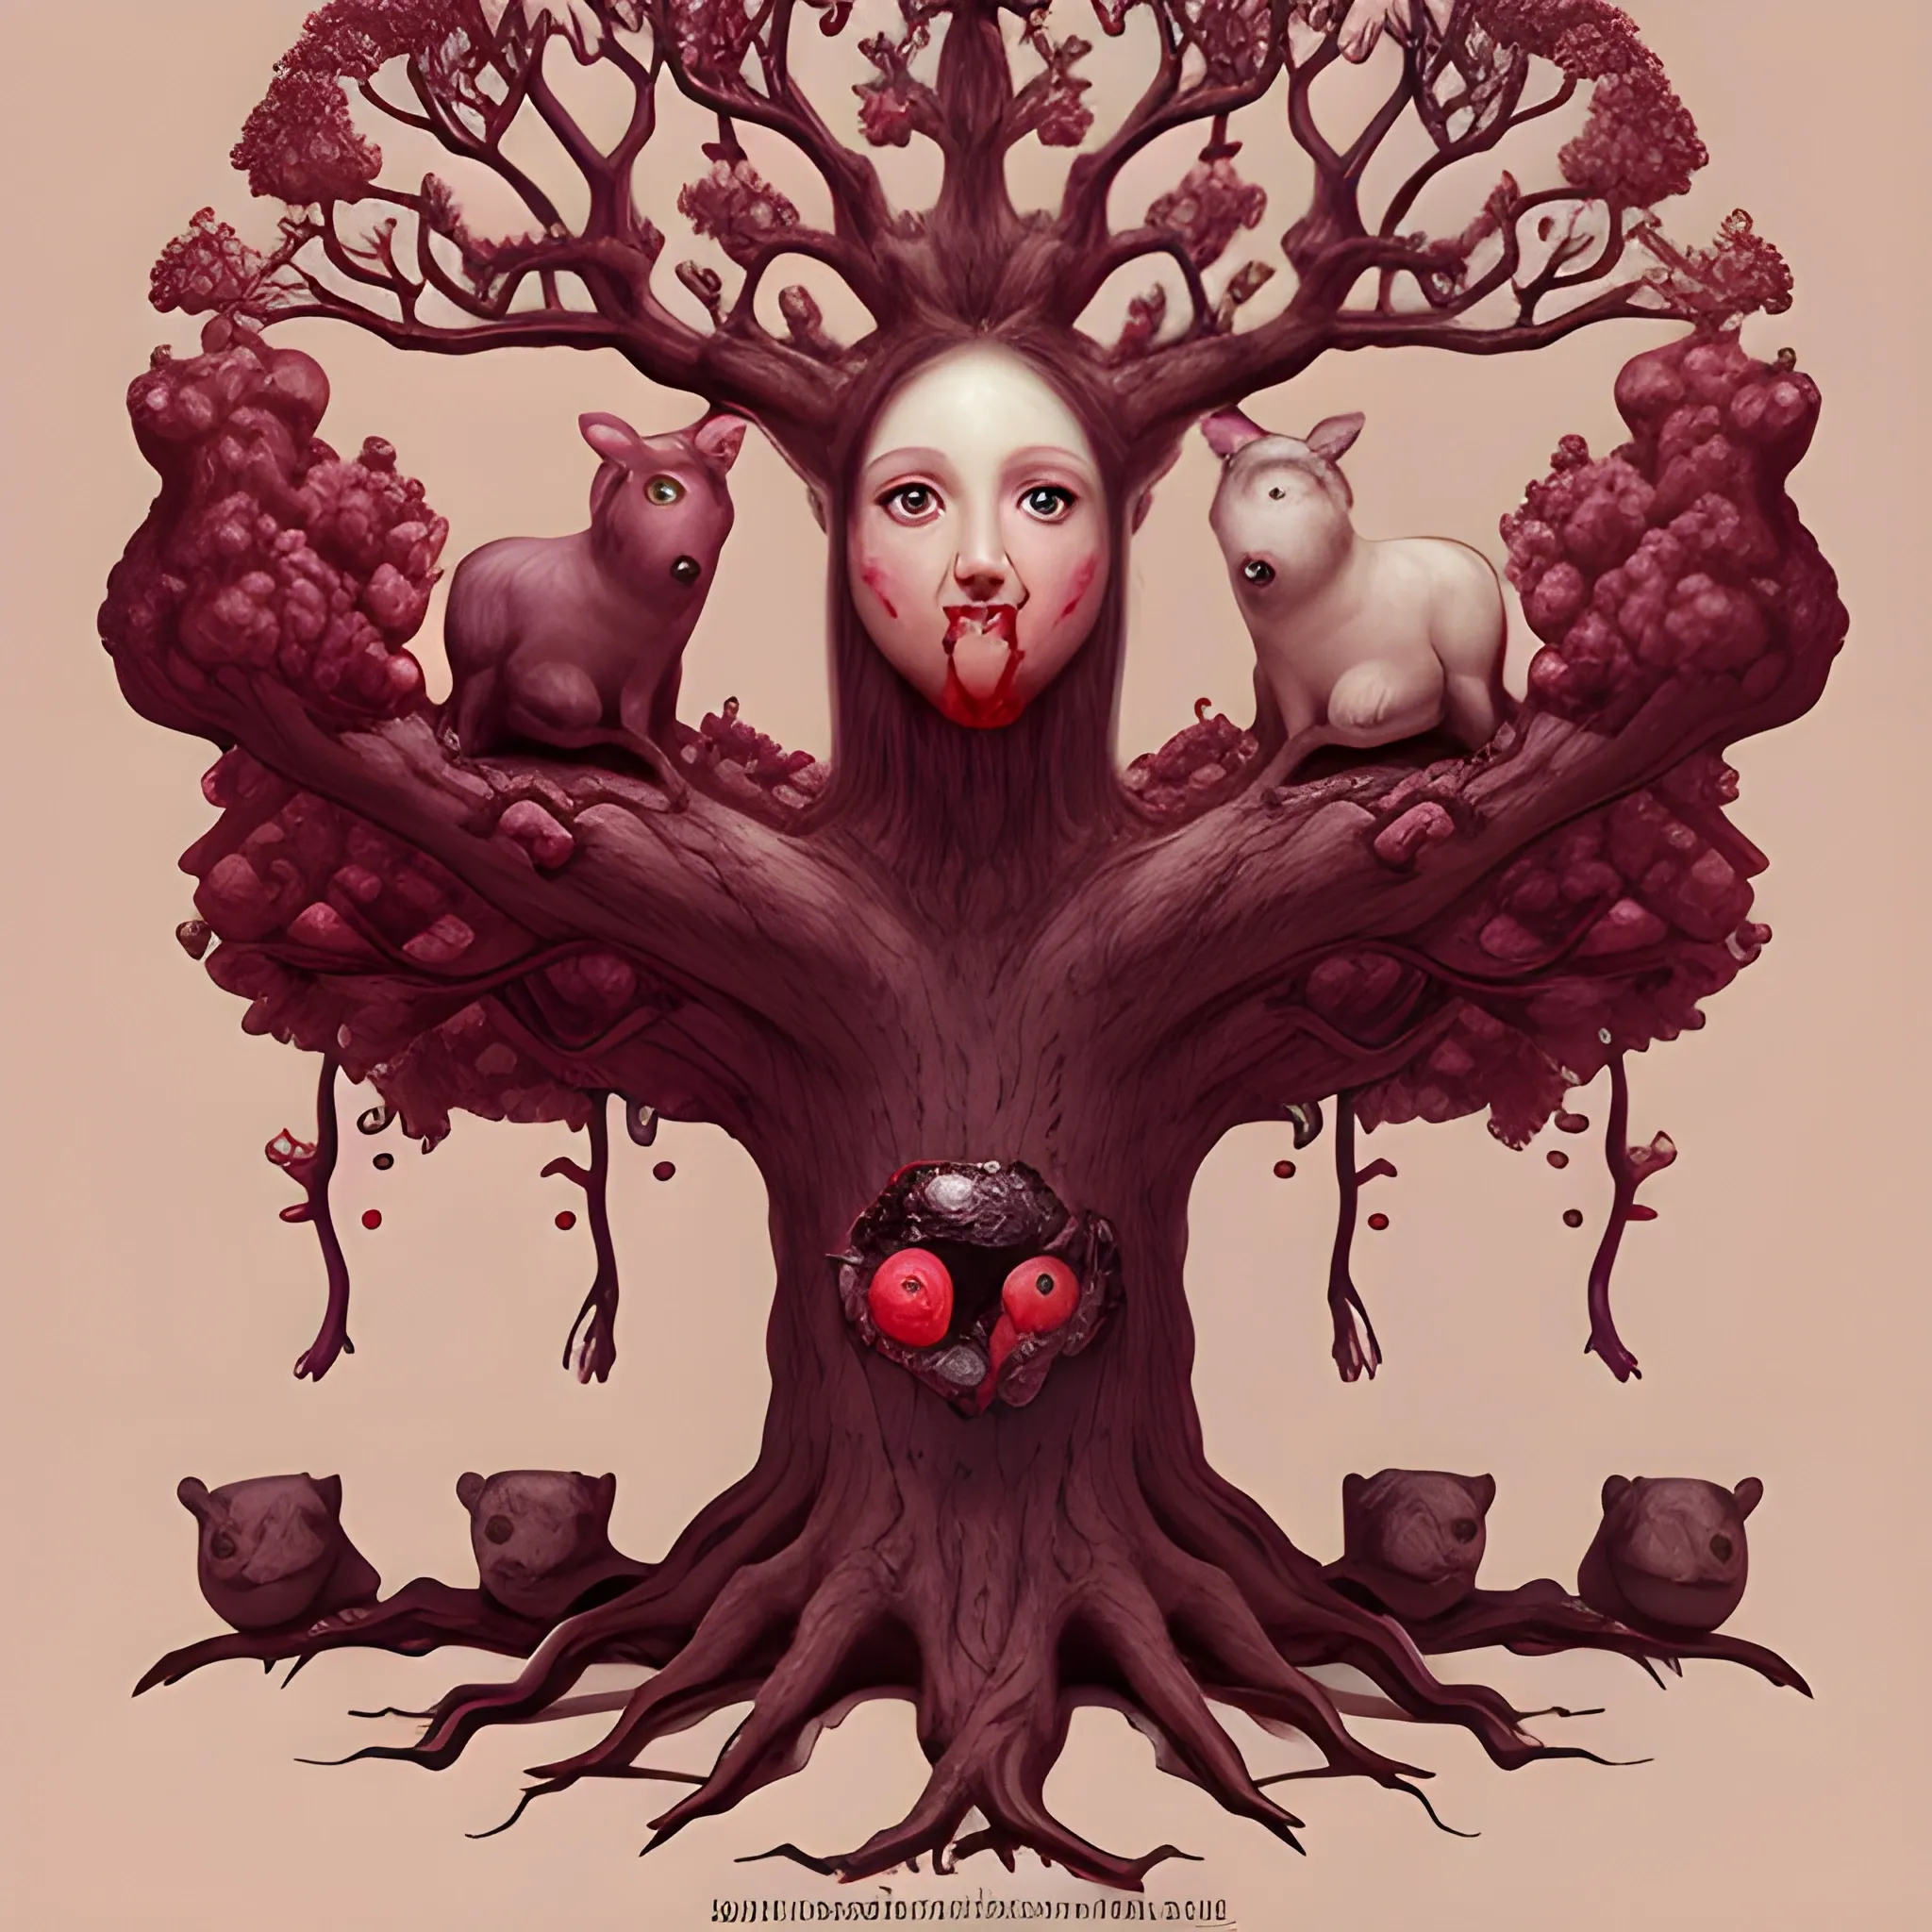 a tree with a real figure of a woman, from the breasts two fruits dripping with blood come out and below a group of animals with the head of a man, a pop surrealism style, and as if it were a color drawing from the 17th century, behance contest winner, great definition
